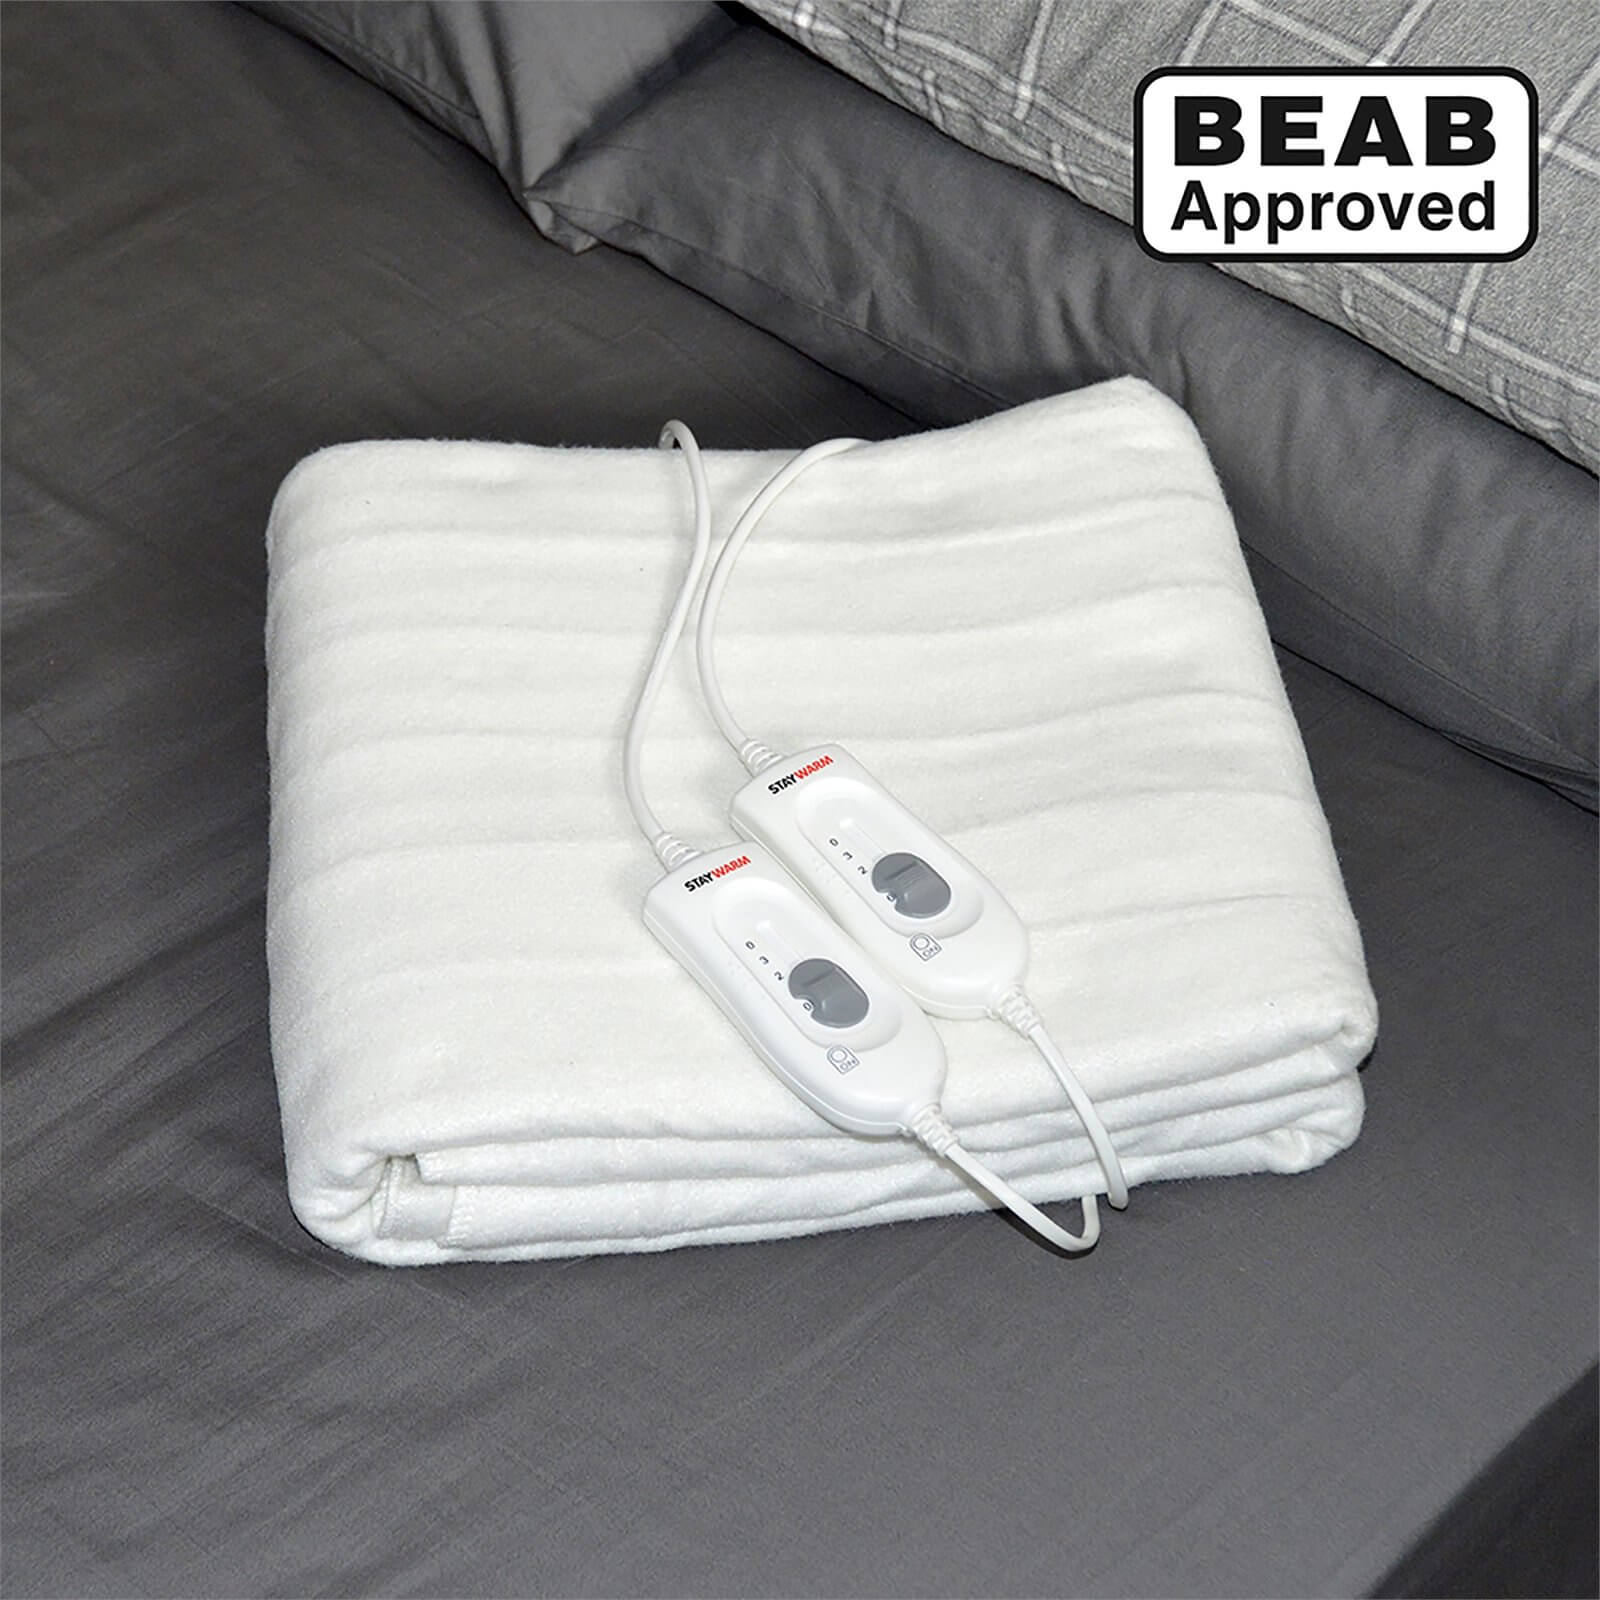 StayWarm Superior Electric Blanket - Double (BEAB Approved)